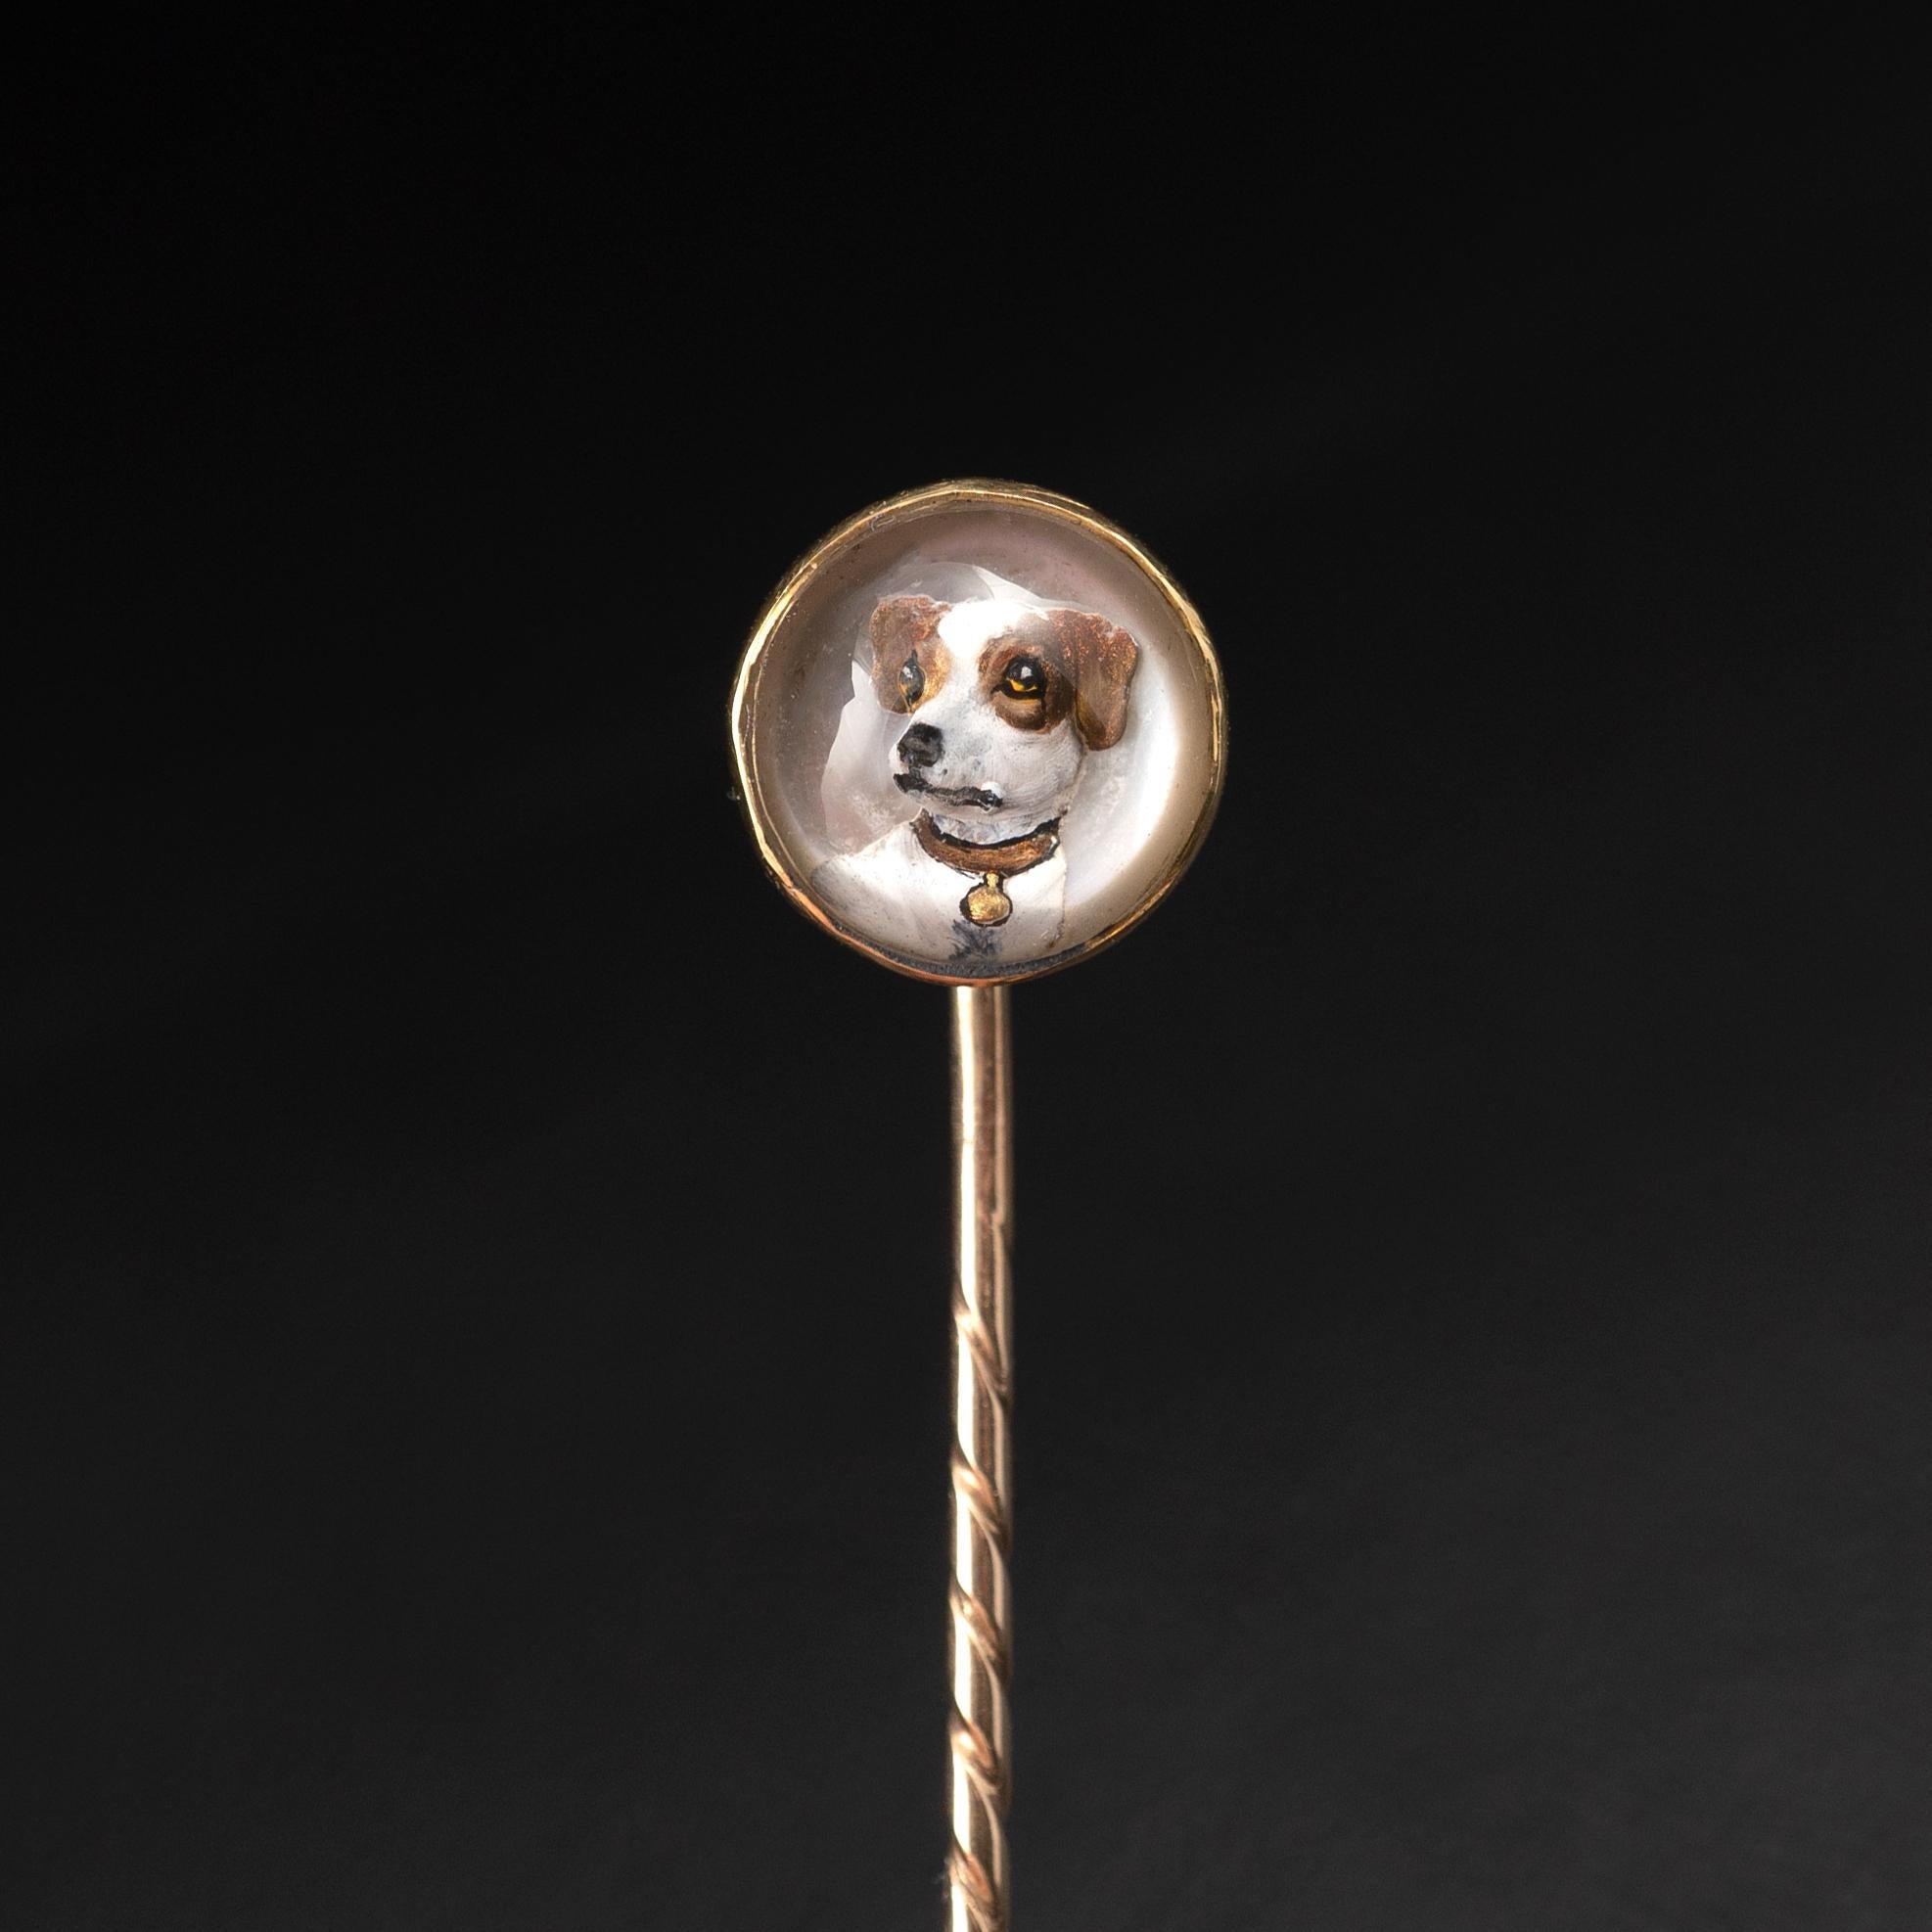 A delightful antique Essex Crystal stick pin with dog portrait, made in 15 karat gold, complete with original antique box, Circa 1900.

The highly collectible pin displays a Jack Russell Terrier dog which appears three-dimensional inside a crystal